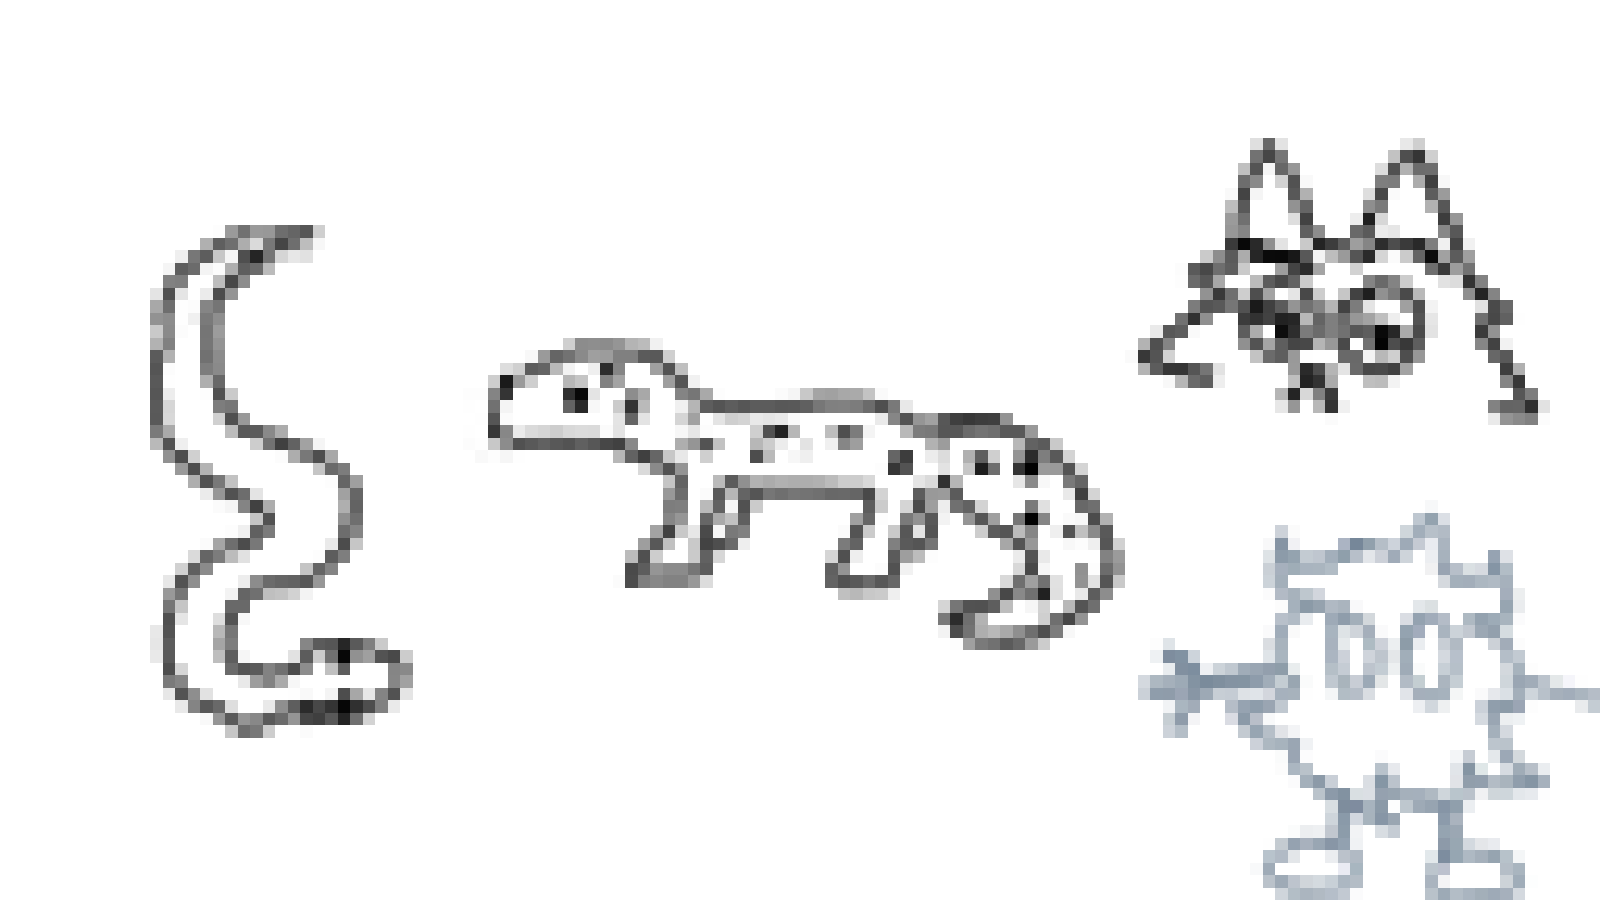 leopard gecko and other things